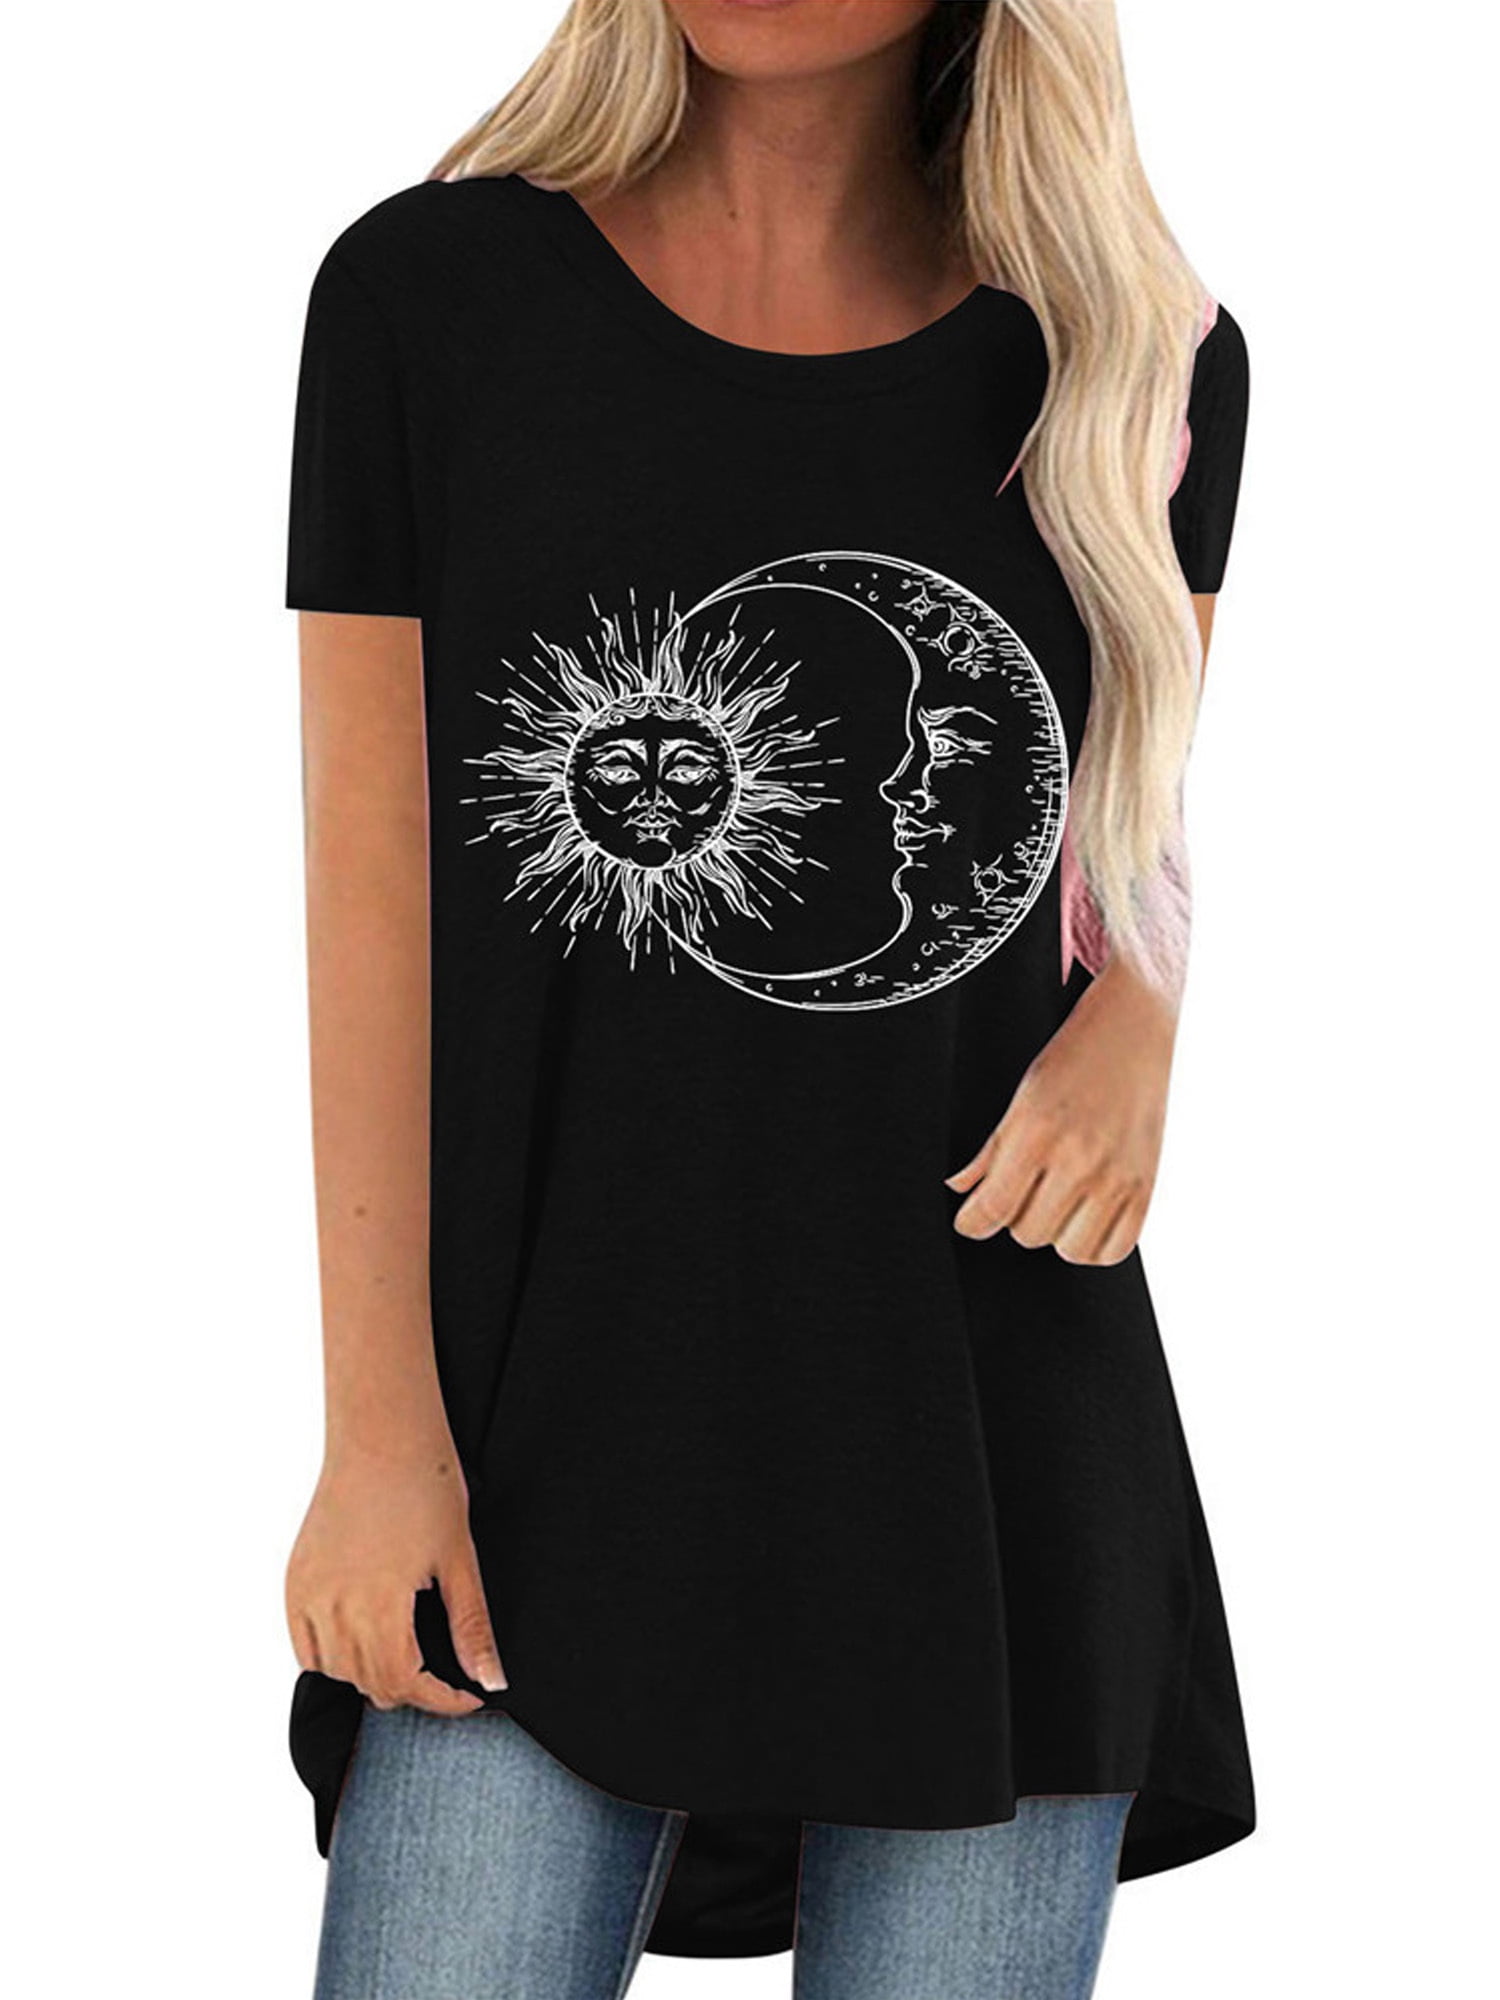 Shirts for Women Plus Size Tops Blouses Summer Short Sleeve Loose Casual T Shirt Junior Teen Girls Graphic Tees 